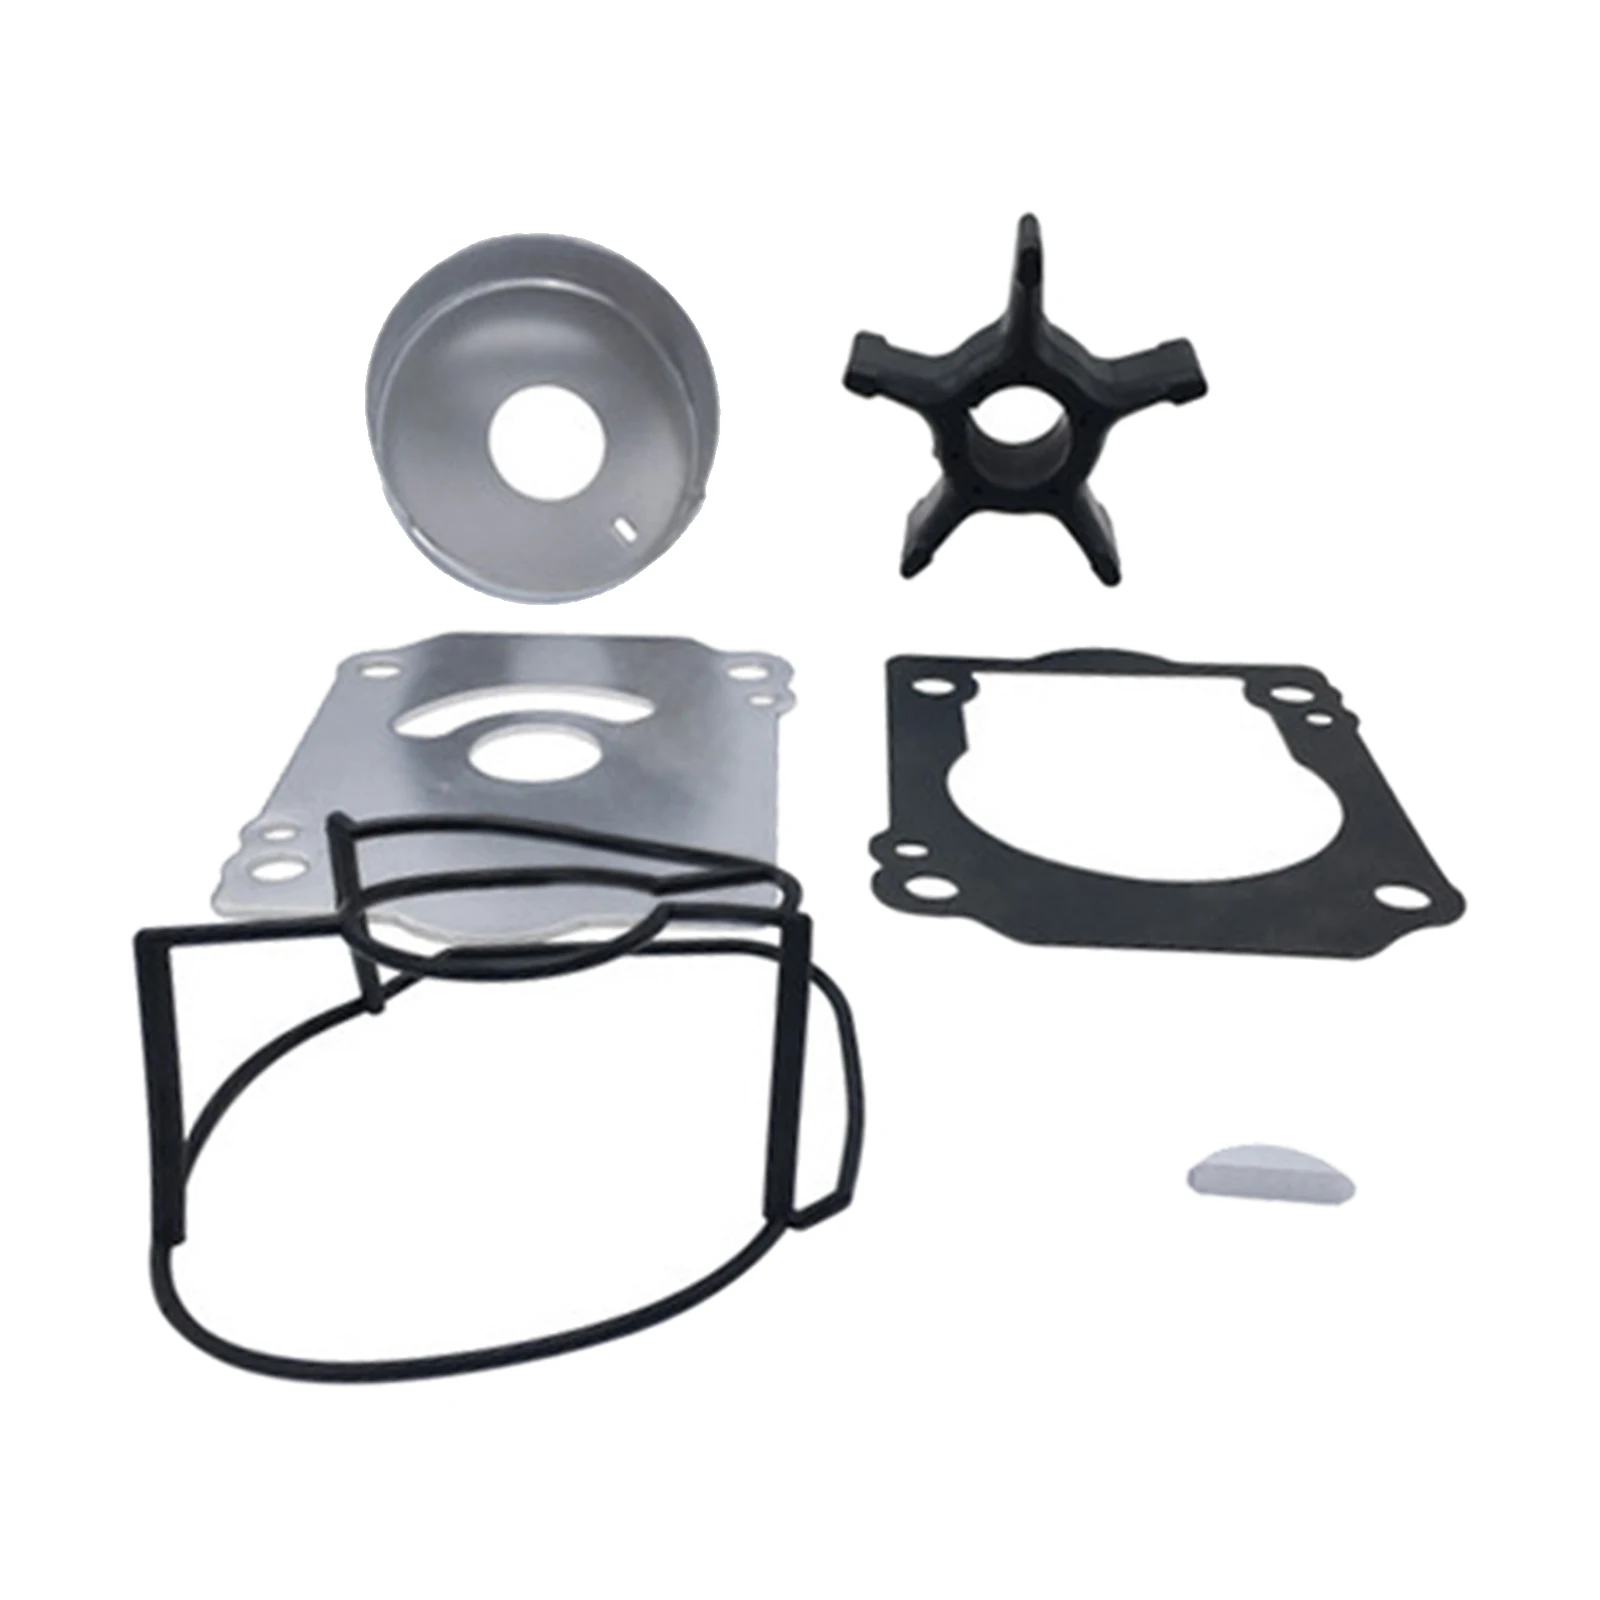 Water Pump Impeller Service Kit 17400-96J02 fits for Suzuki Outboards, Boat Motor Spare Parts High Reliability